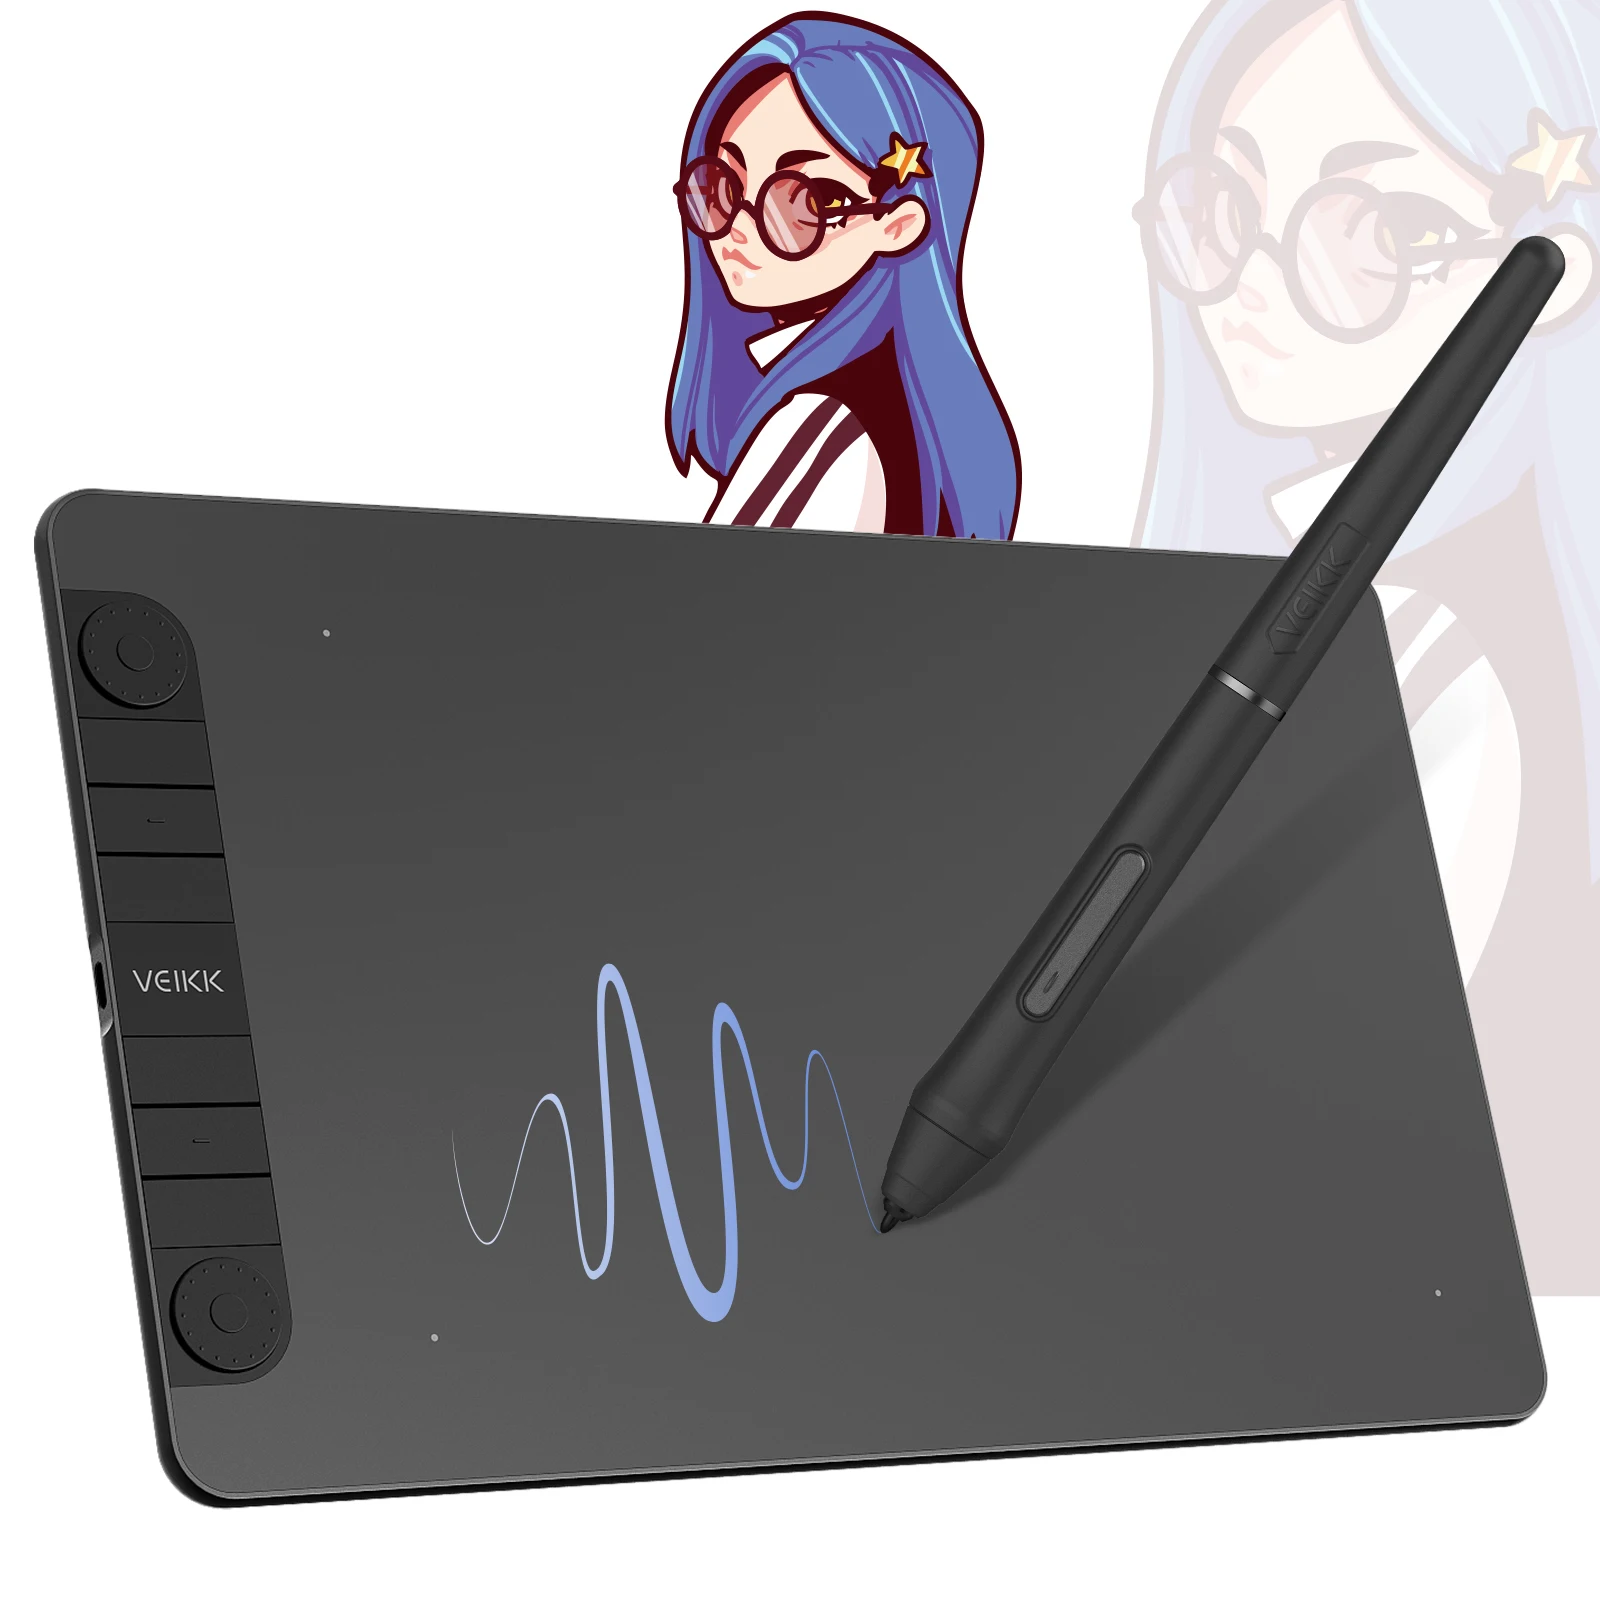 VEIKK VK1060 PRO 10x6 Inch Graphics Digital Drawing Tablet With Tilt 8192 pressure For Art Education Support Android Window Mac